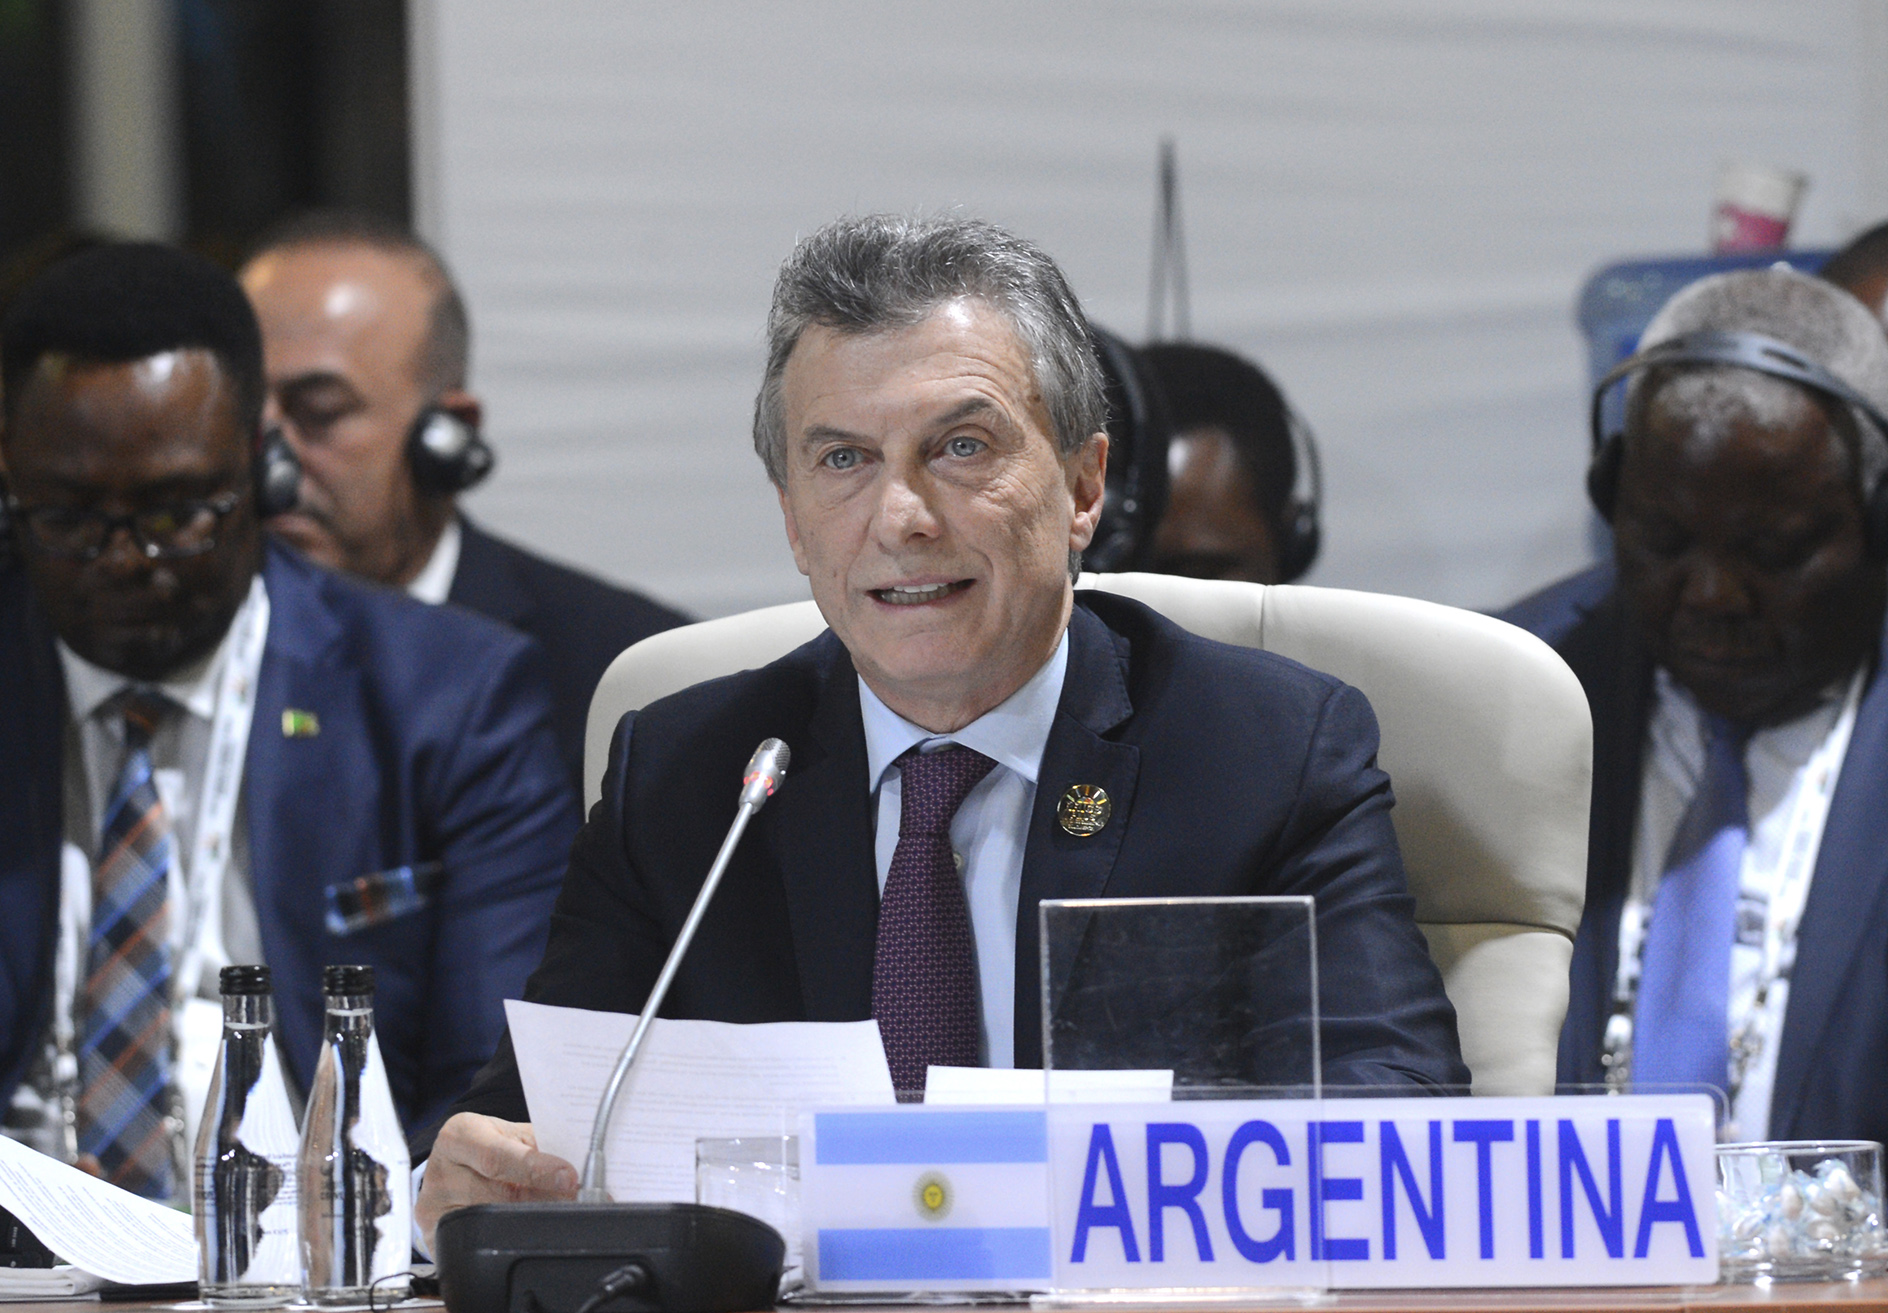 President Macri at 10th BRICS Summit: “We are taking the G20 presidency forward with a vision from the South, aiming to transmit the voice of a whole region”